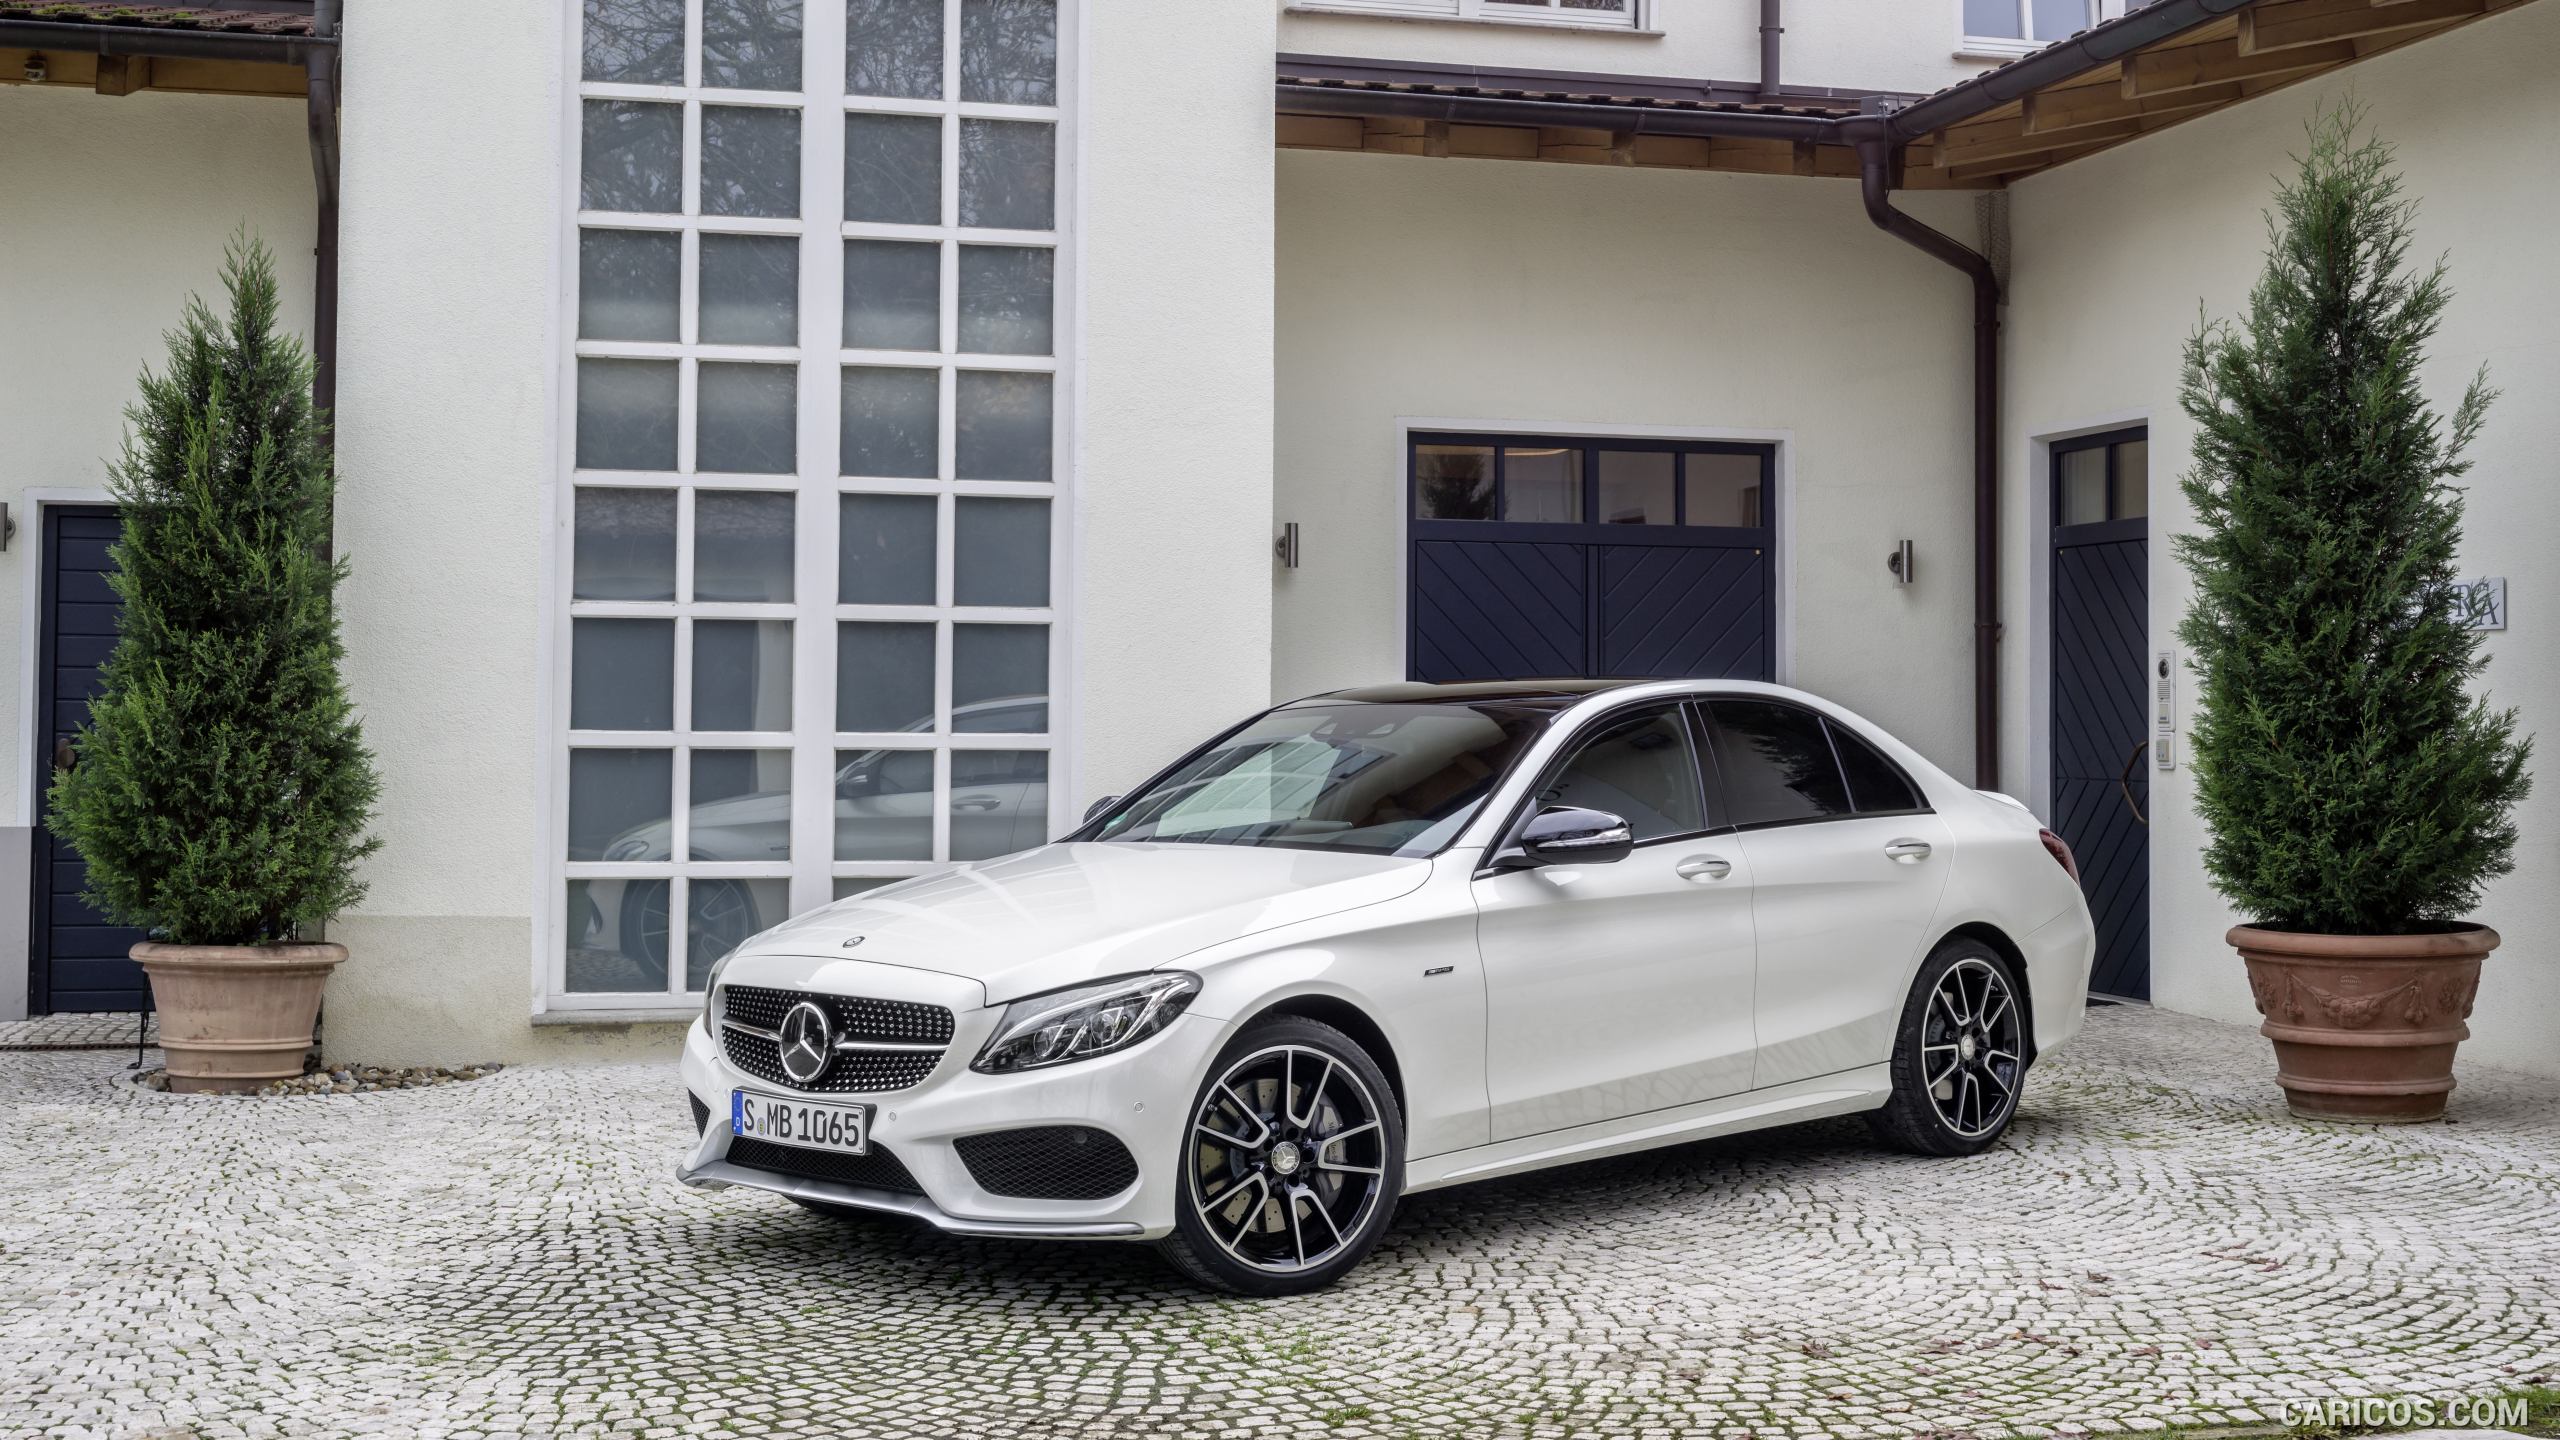 2016 Mercedes-Benz C450 AMG 4MATIC (Diamond White) - Front, #1 of 122